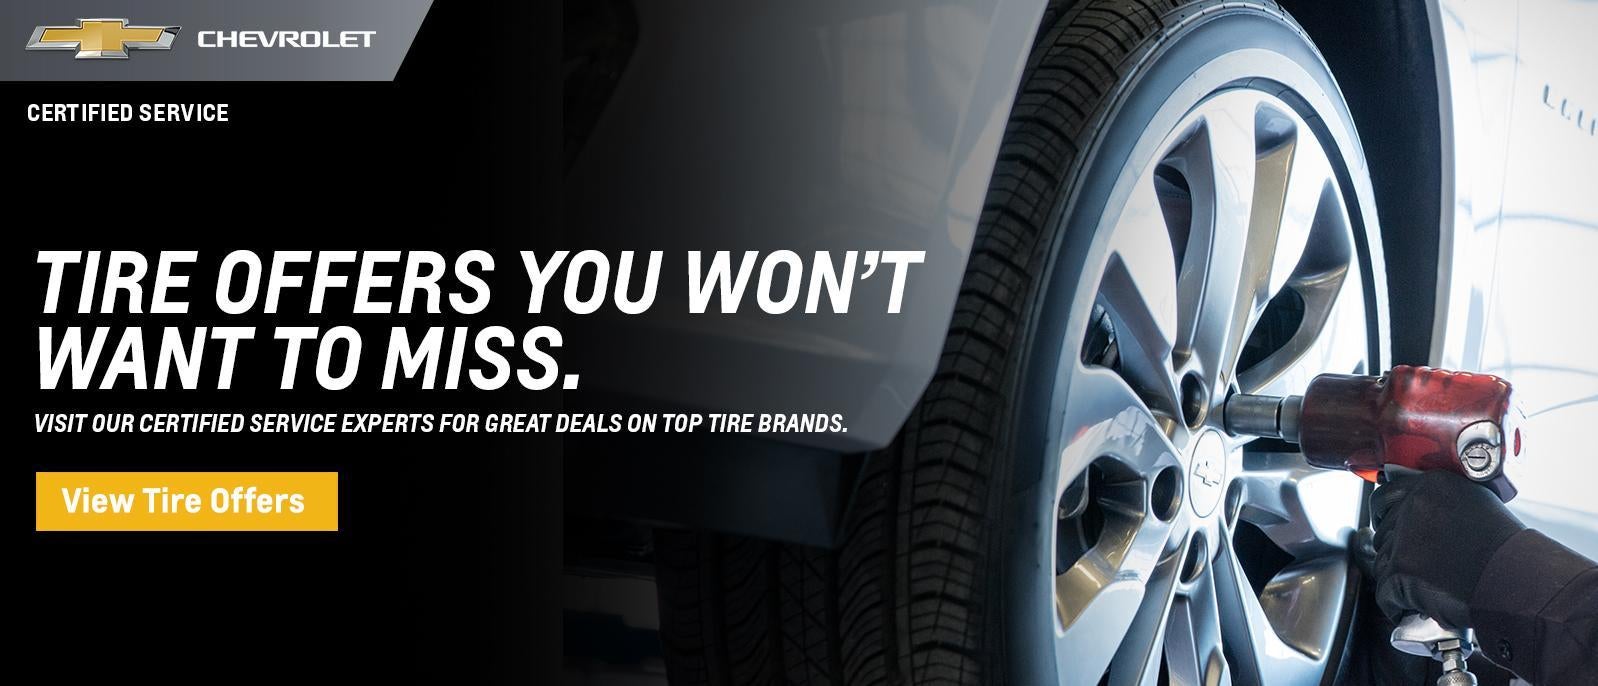 Tire offers you won't want to miss